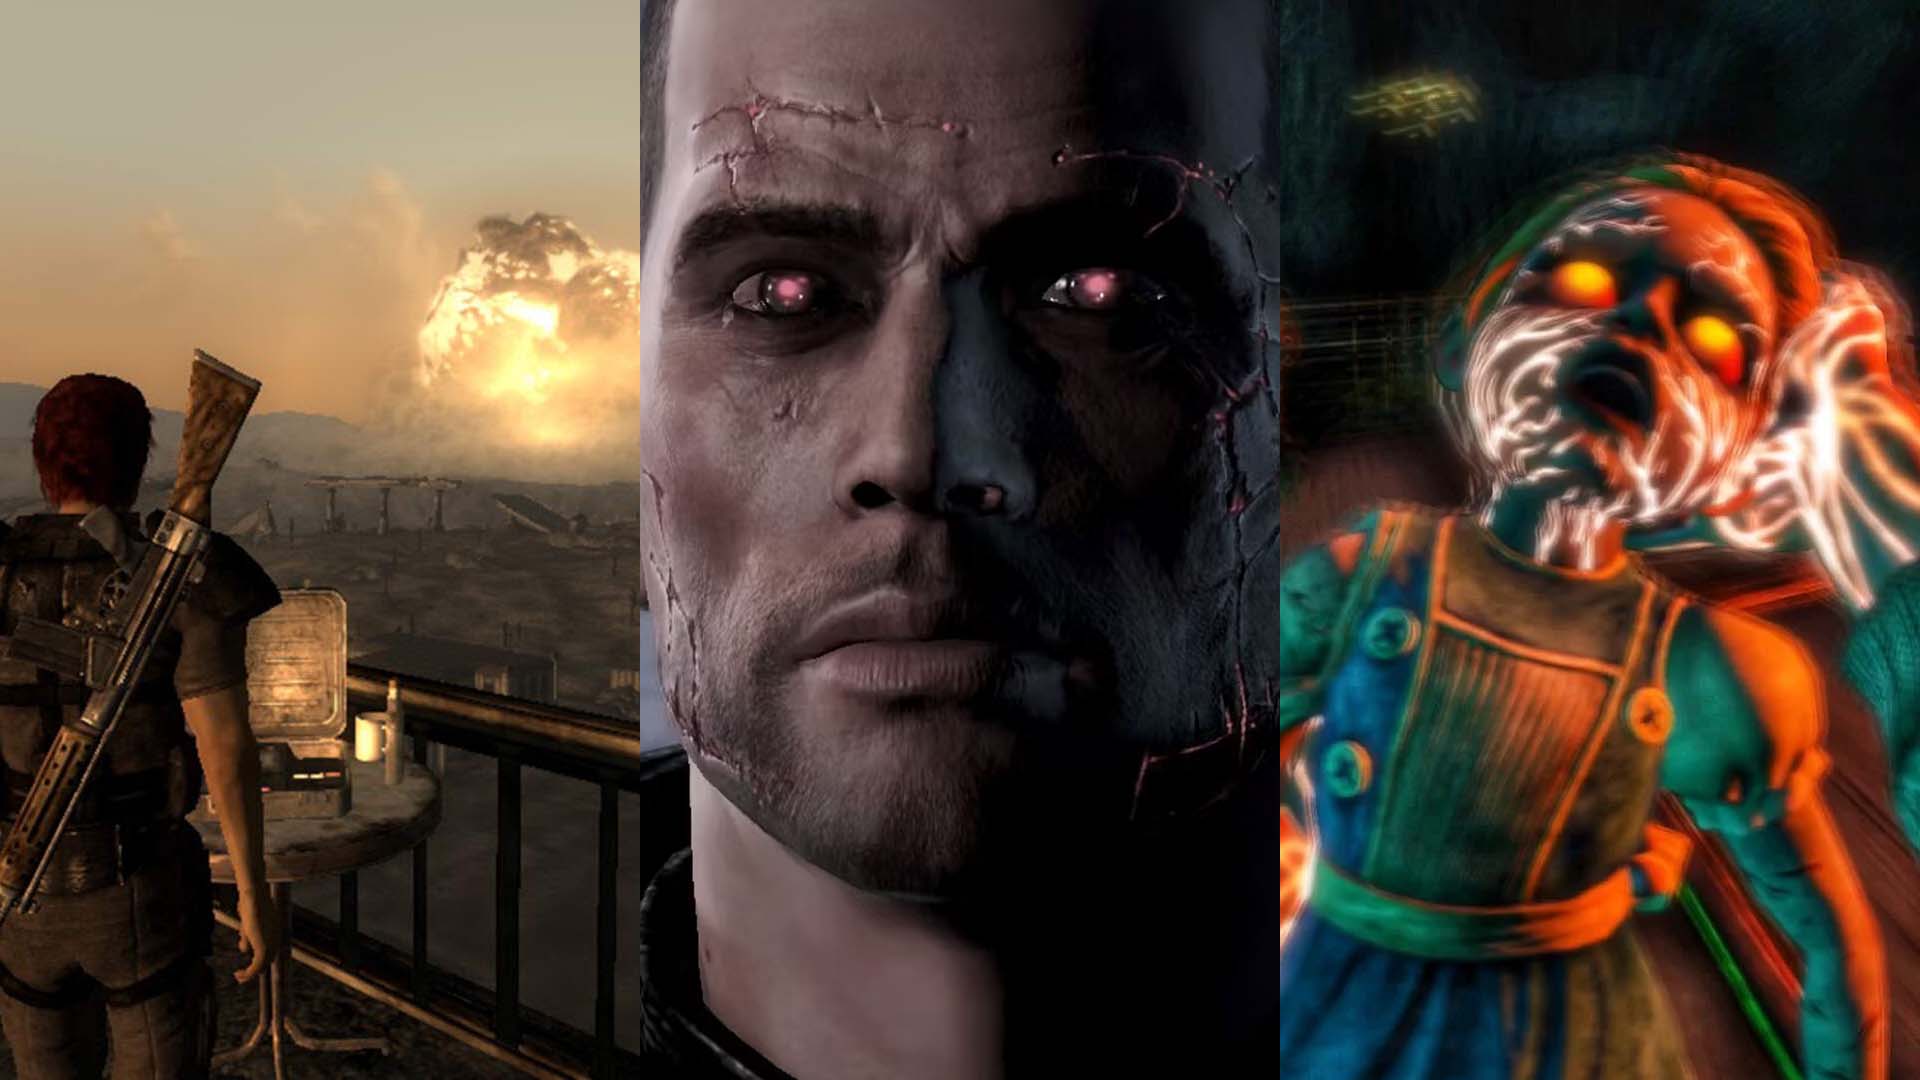 Three images. The first shows Megaton atomised by a nuclear explosion in Fallout 3. The second shows Commander Shepheard from Mass Effect covered in scars. The third shows a little sister from Bioshock being harvested.